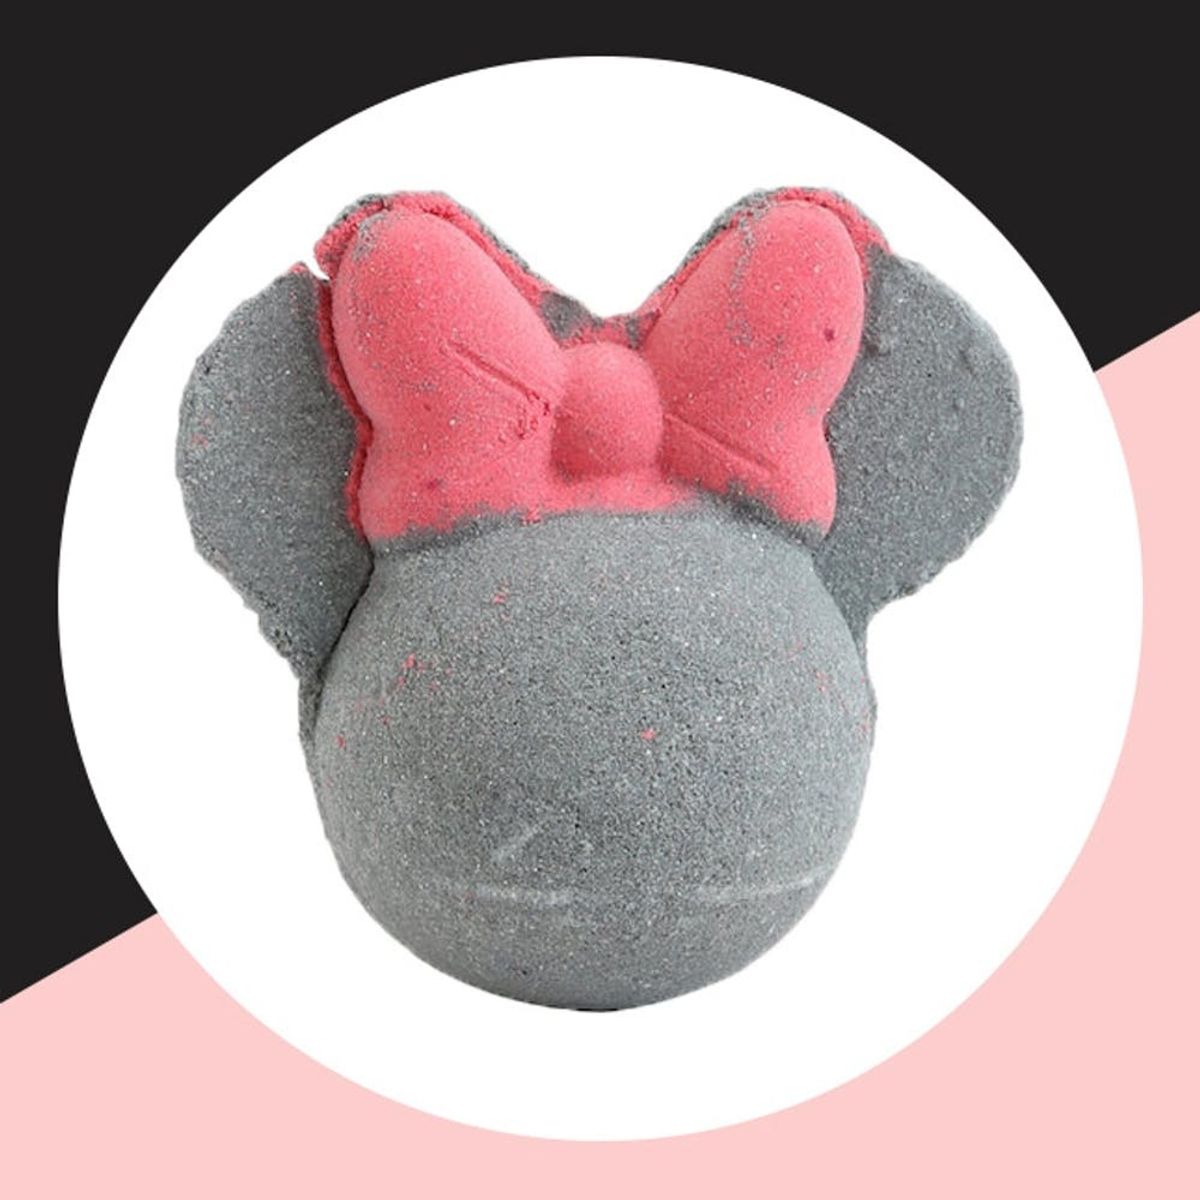 These Enchanting Disney Bath Bombs Are Just What You Need for the Most Magical Soak Ever